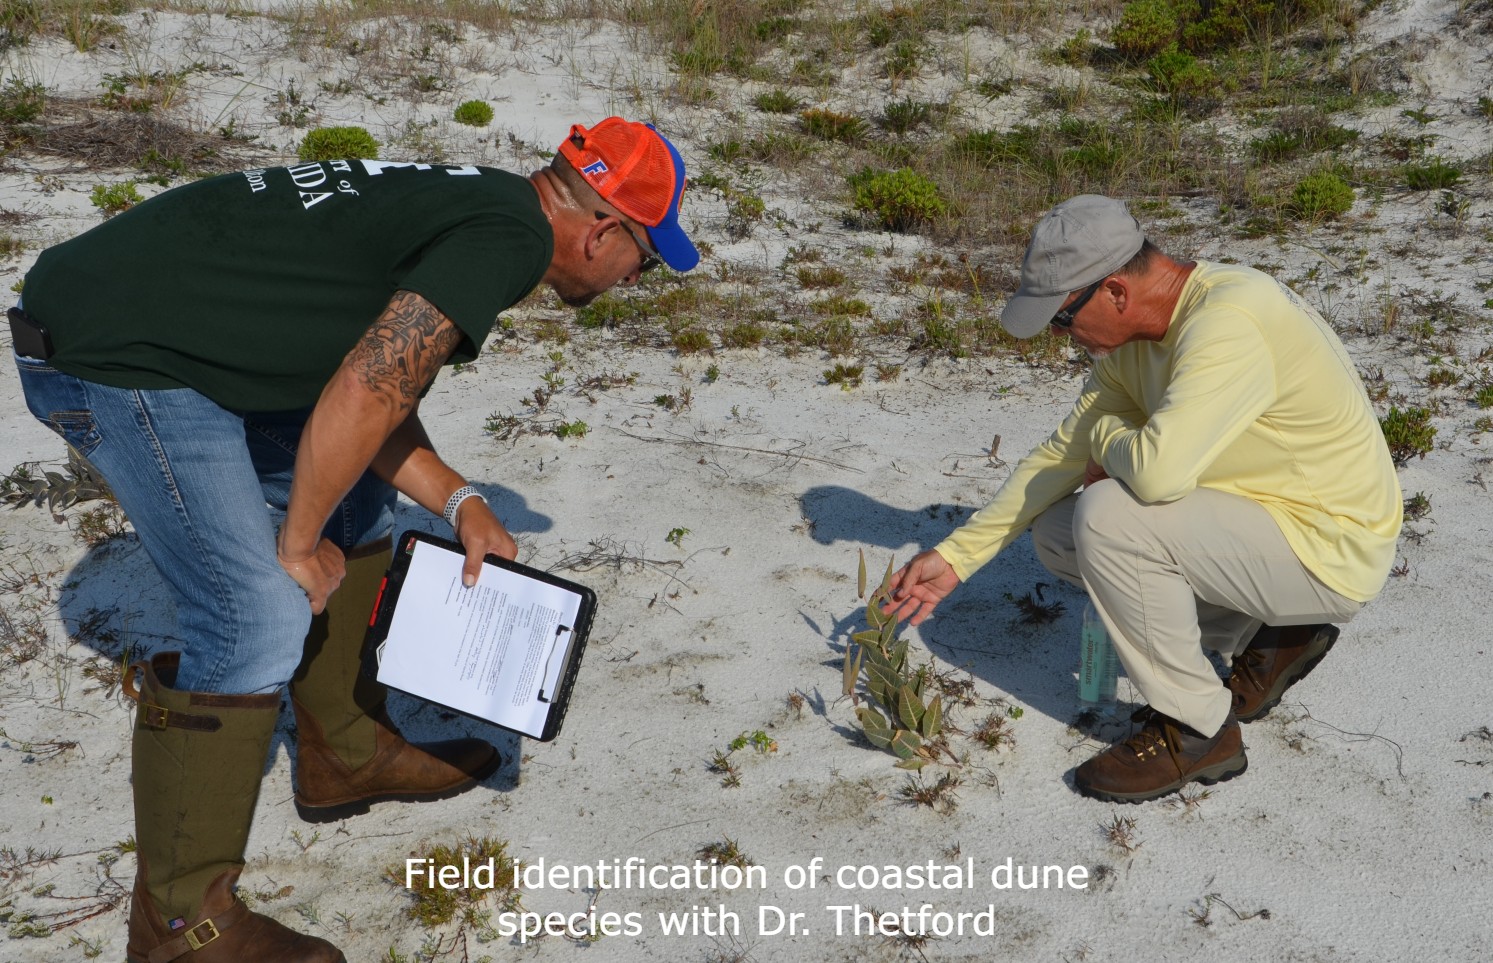 Field identification of coastal dune species with Dr. Thetford